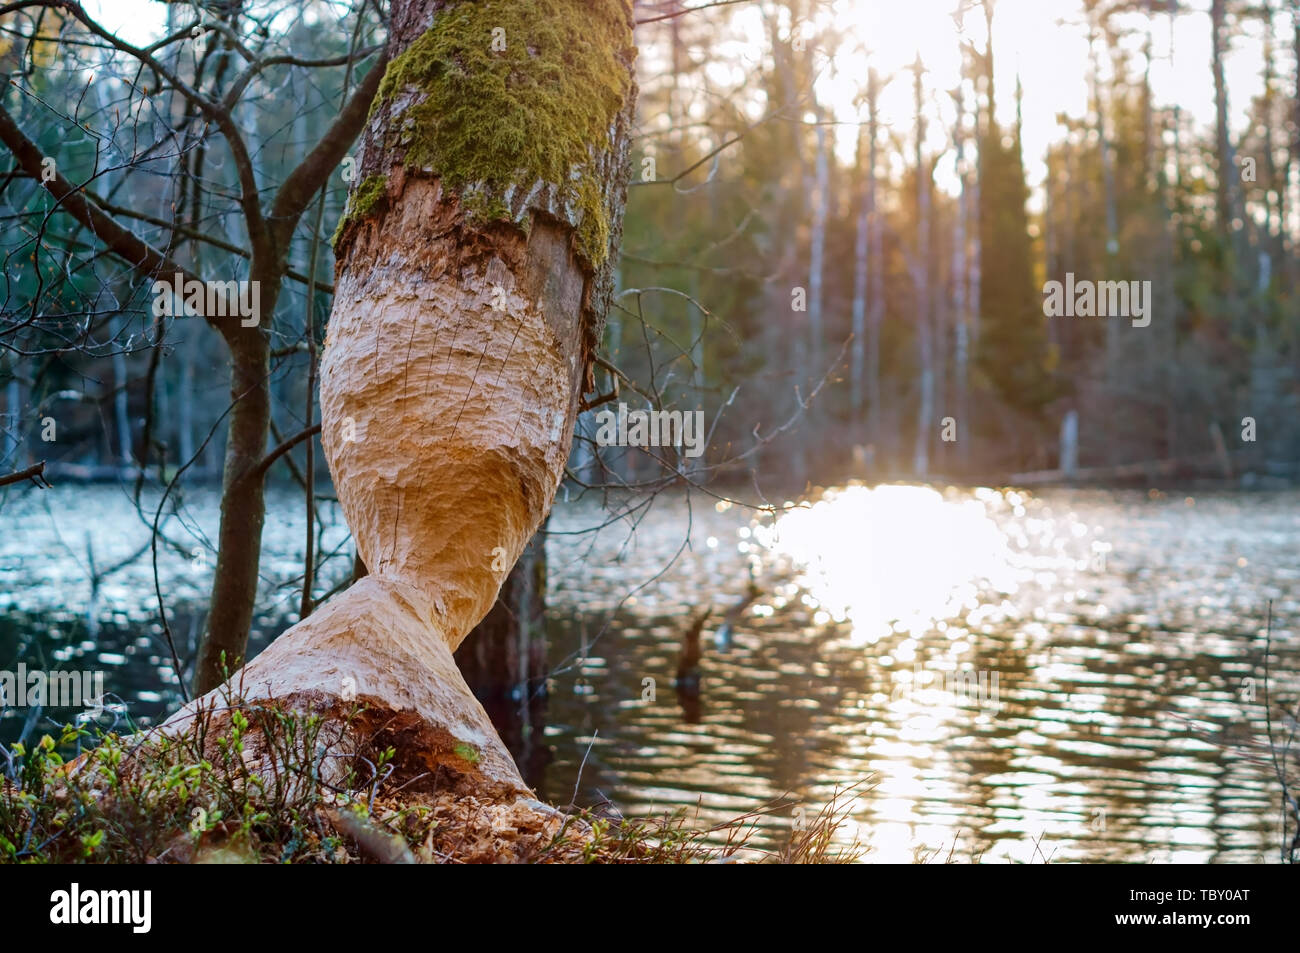 tree gnawed by the beaver, the beaver teeth marks on a tree trunk Stock Photo